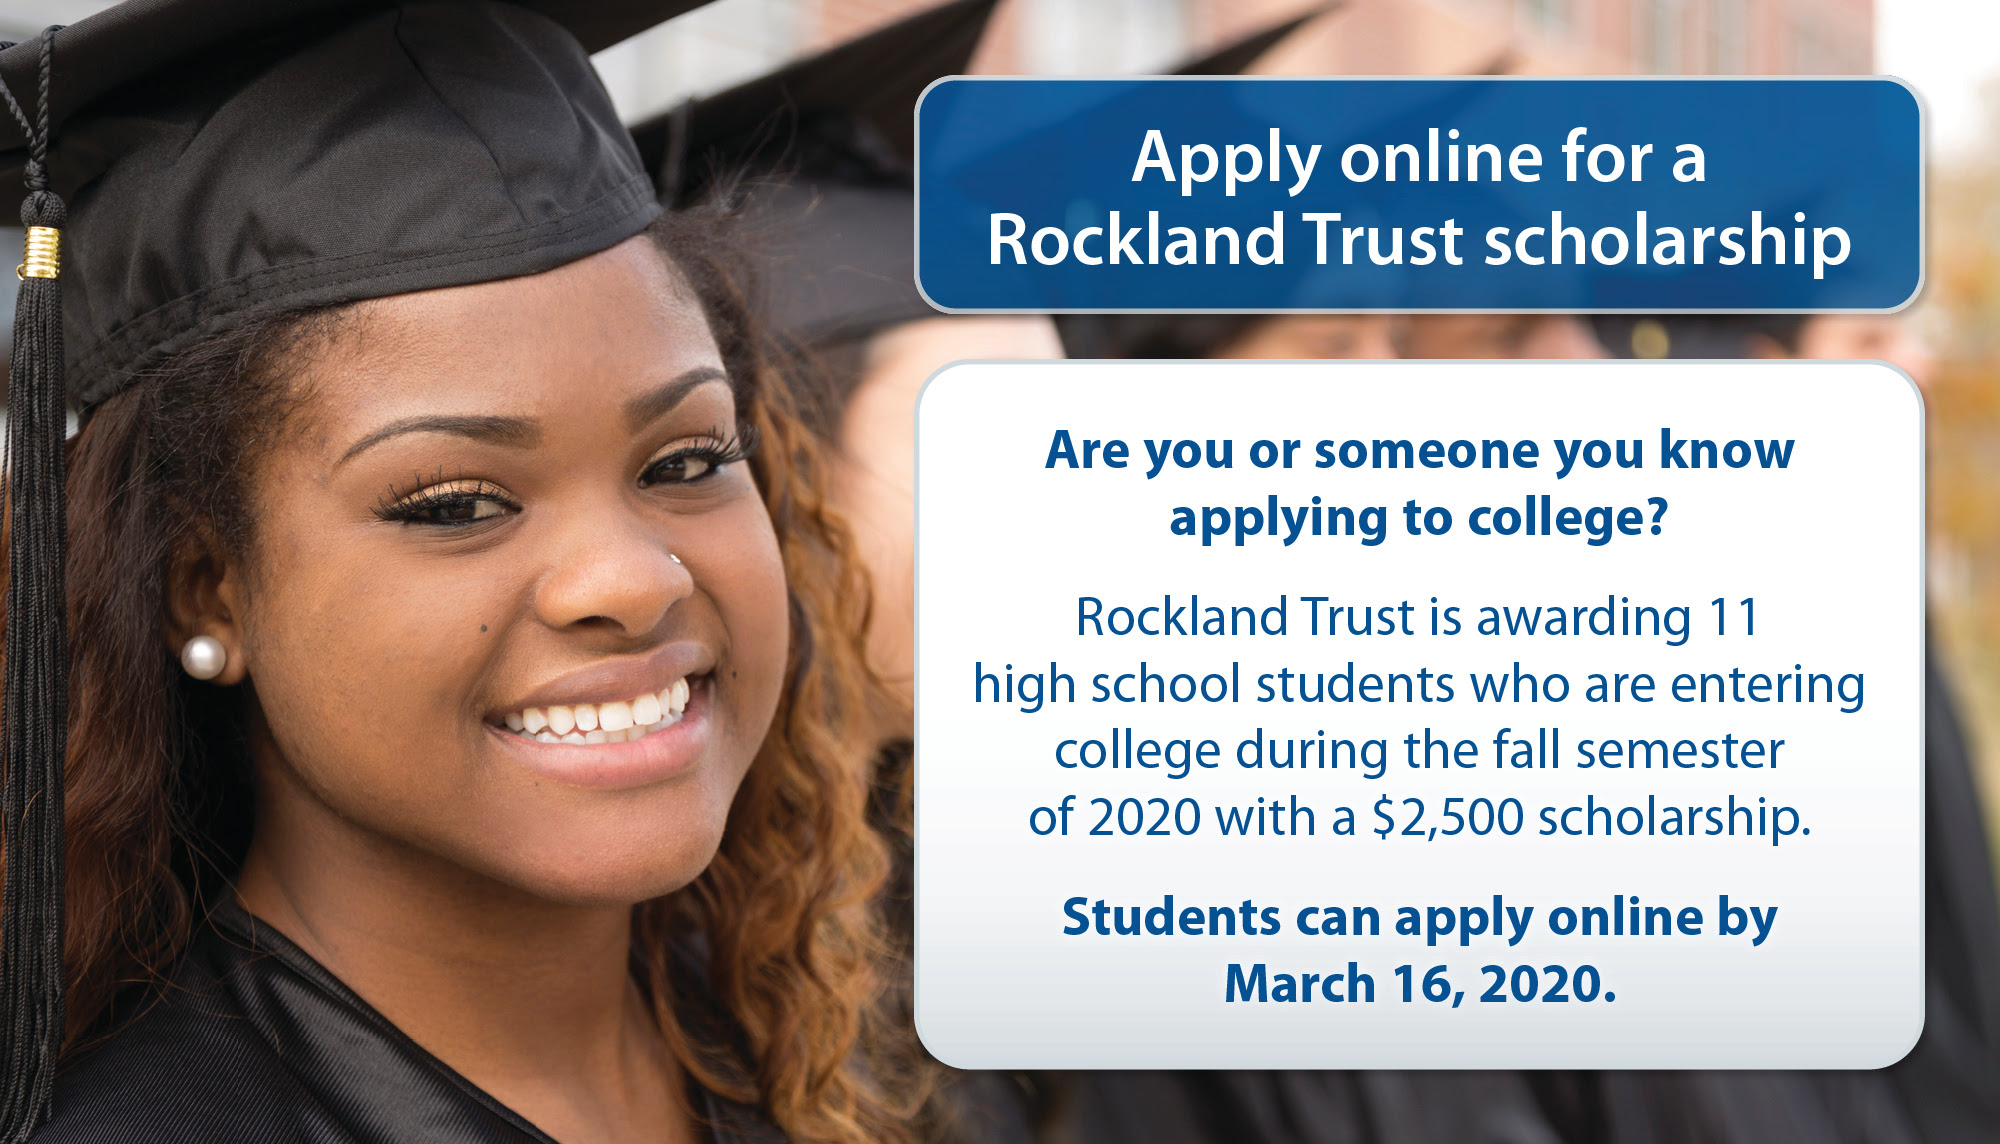 Rockland Trust - apply for a scholarship